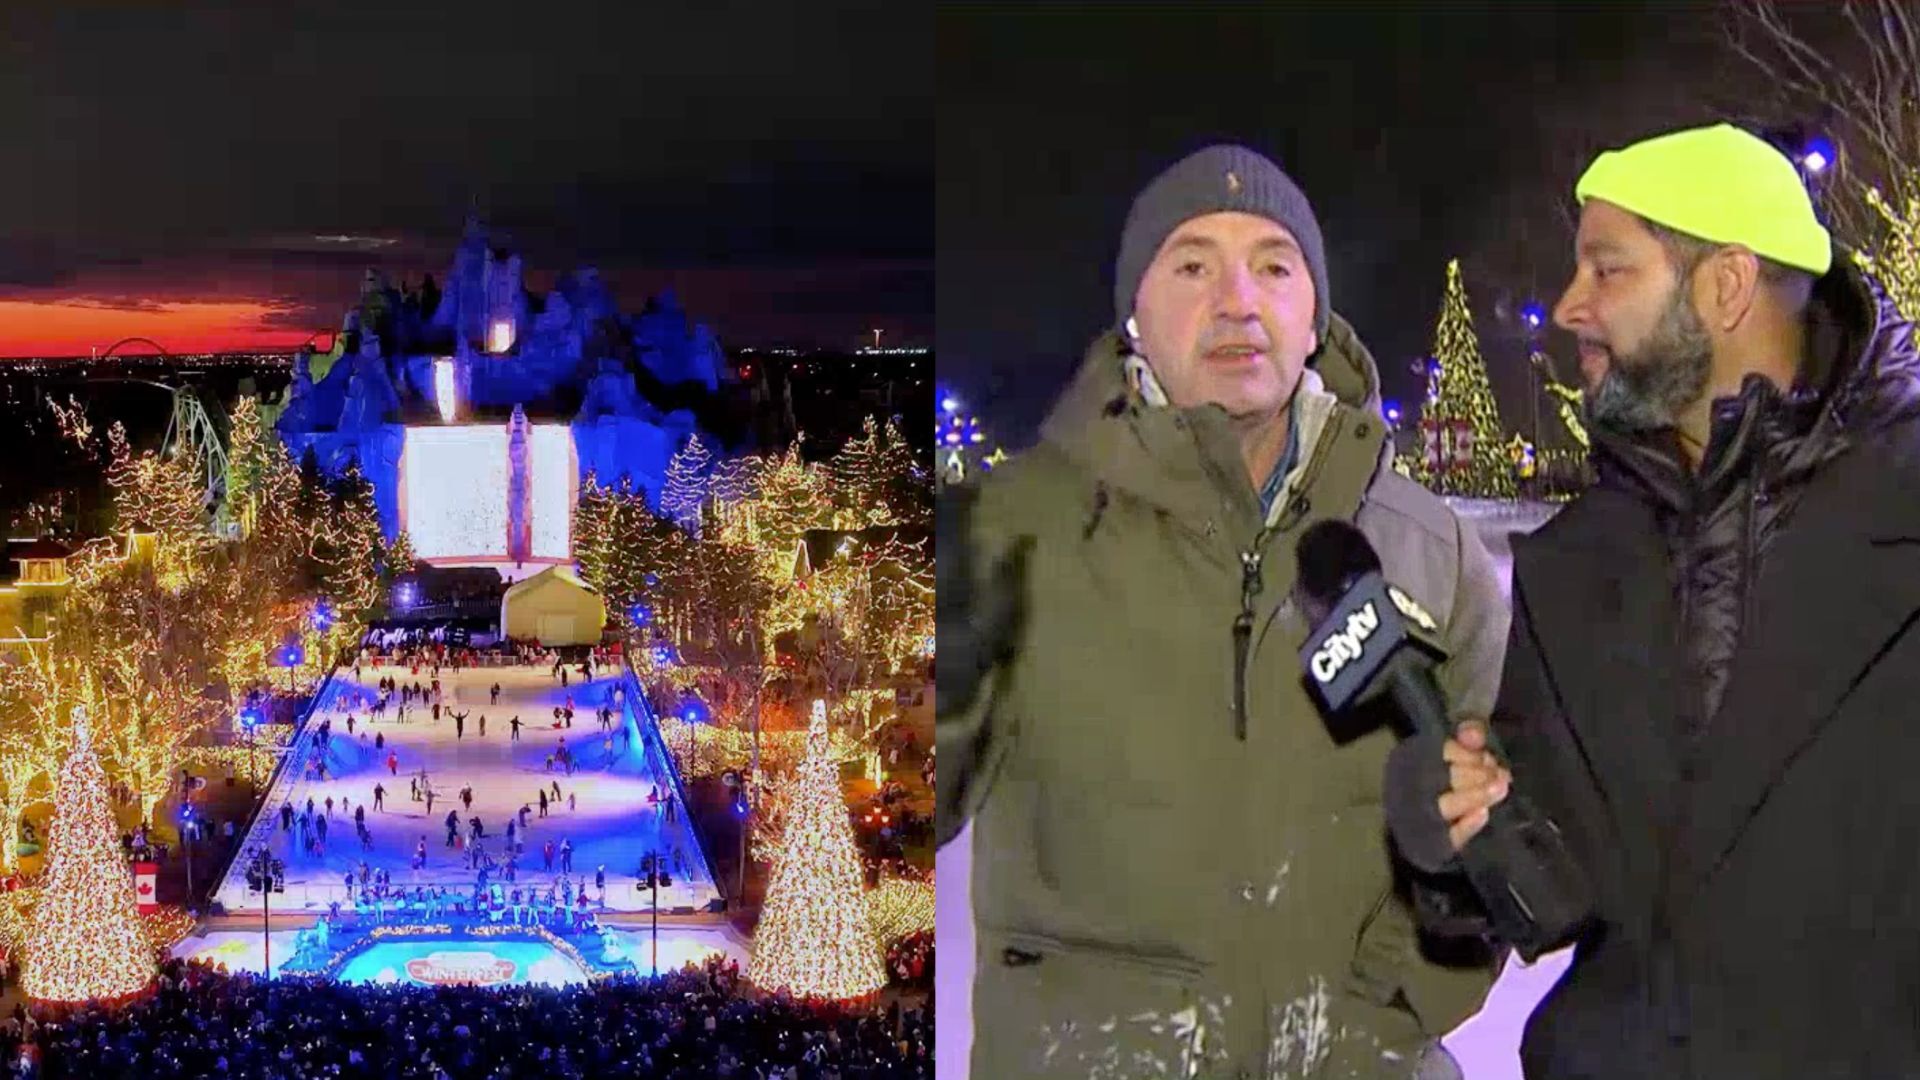 Step inside Canada's Wonderland's WinterFest for a BIG dose of holiday cheer